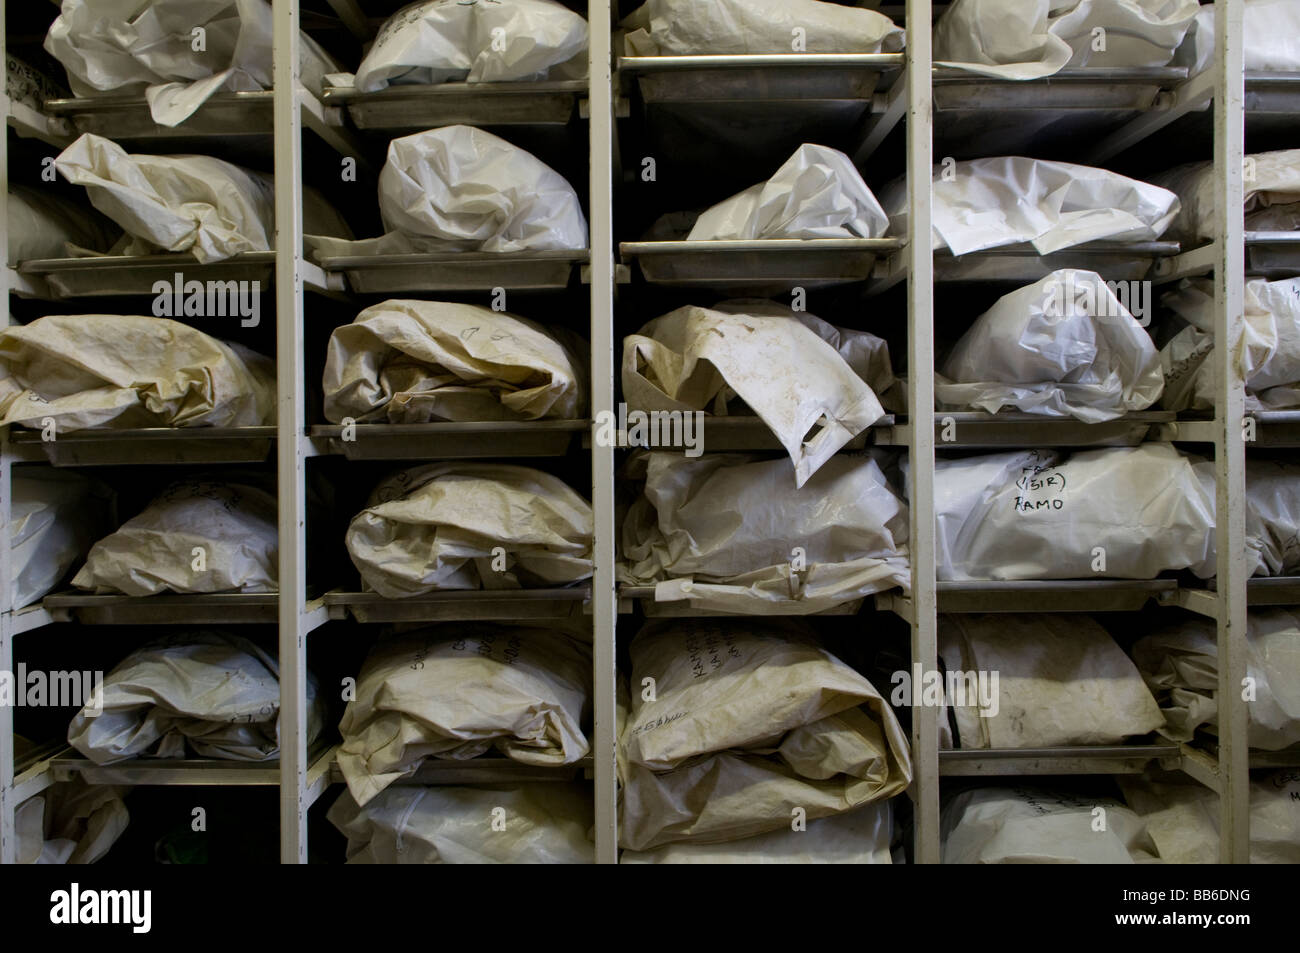 Remains of human bodies packed at a section of the refrigerated mortuary.of ICMP commission of missing persons in the town of Lukavac, Bosnia Stock Photo